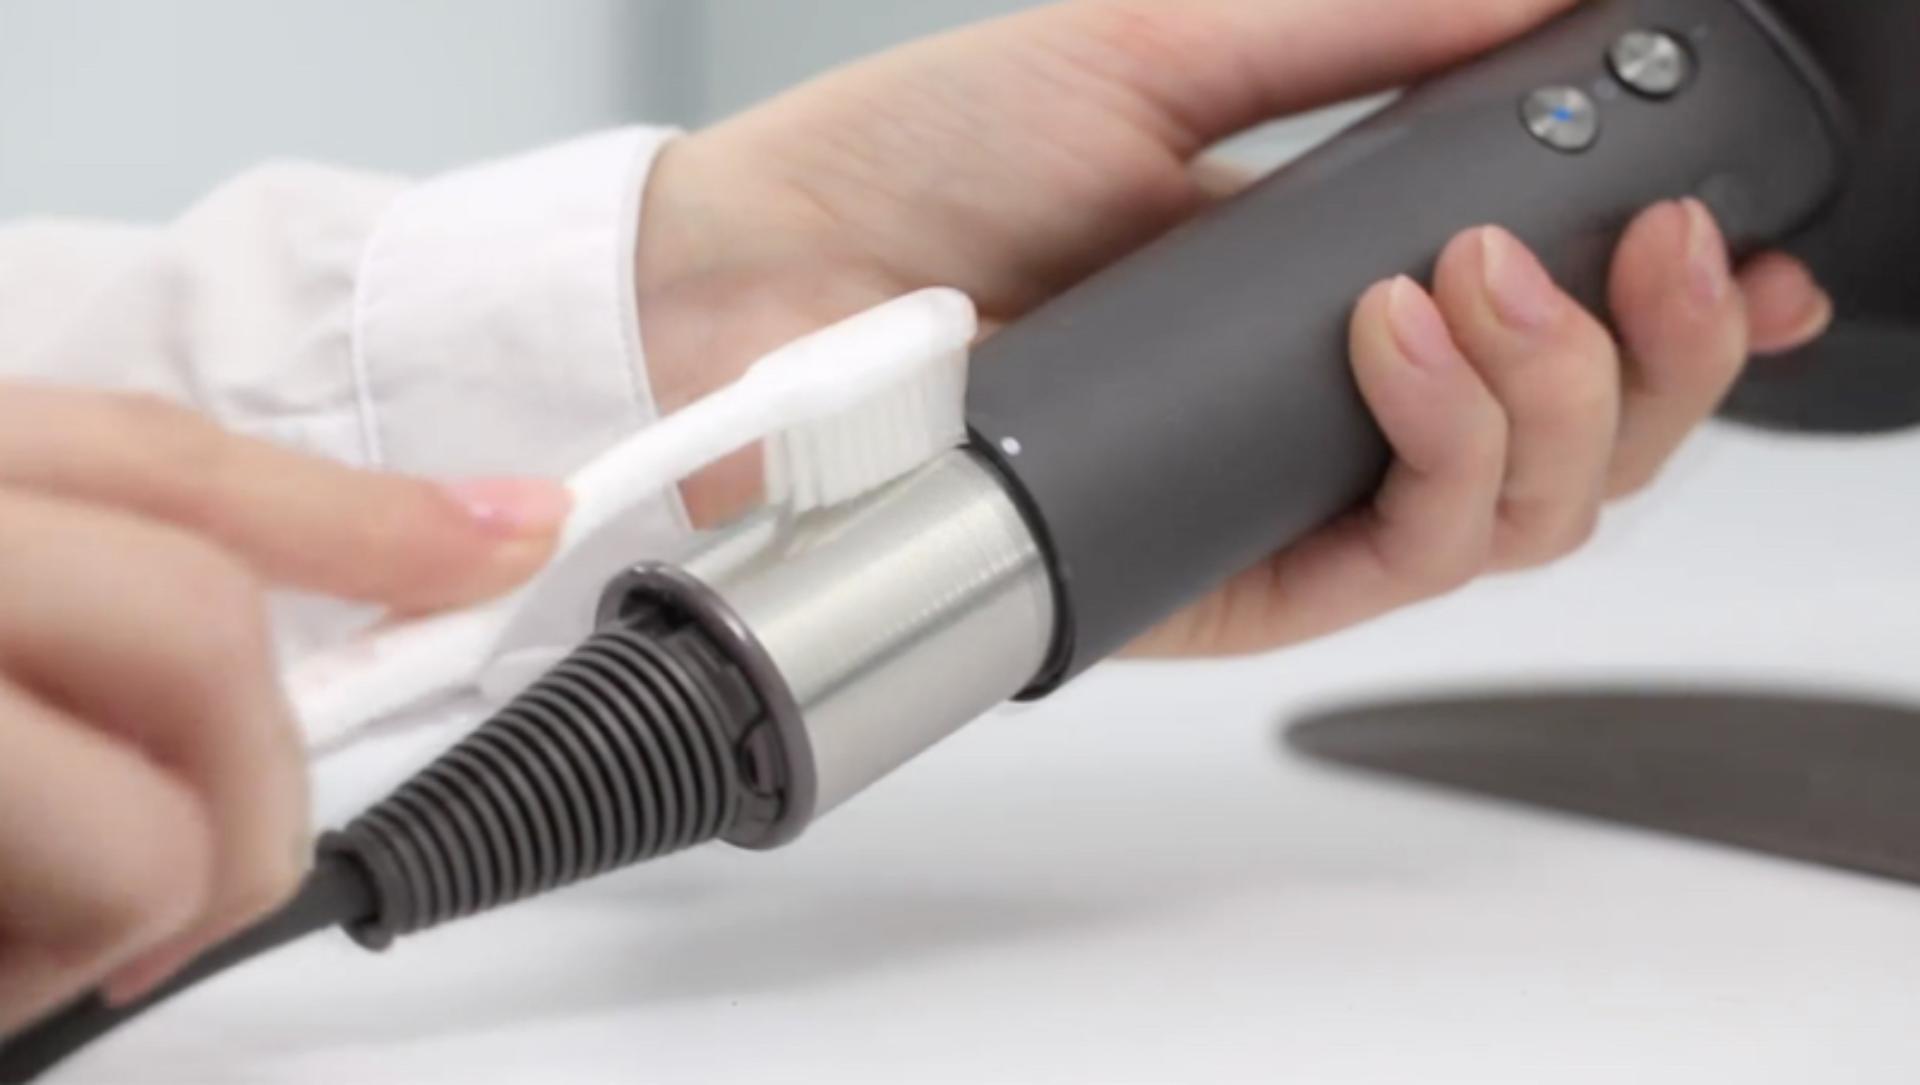 cleaning a hairdryer filter with a toothbrush